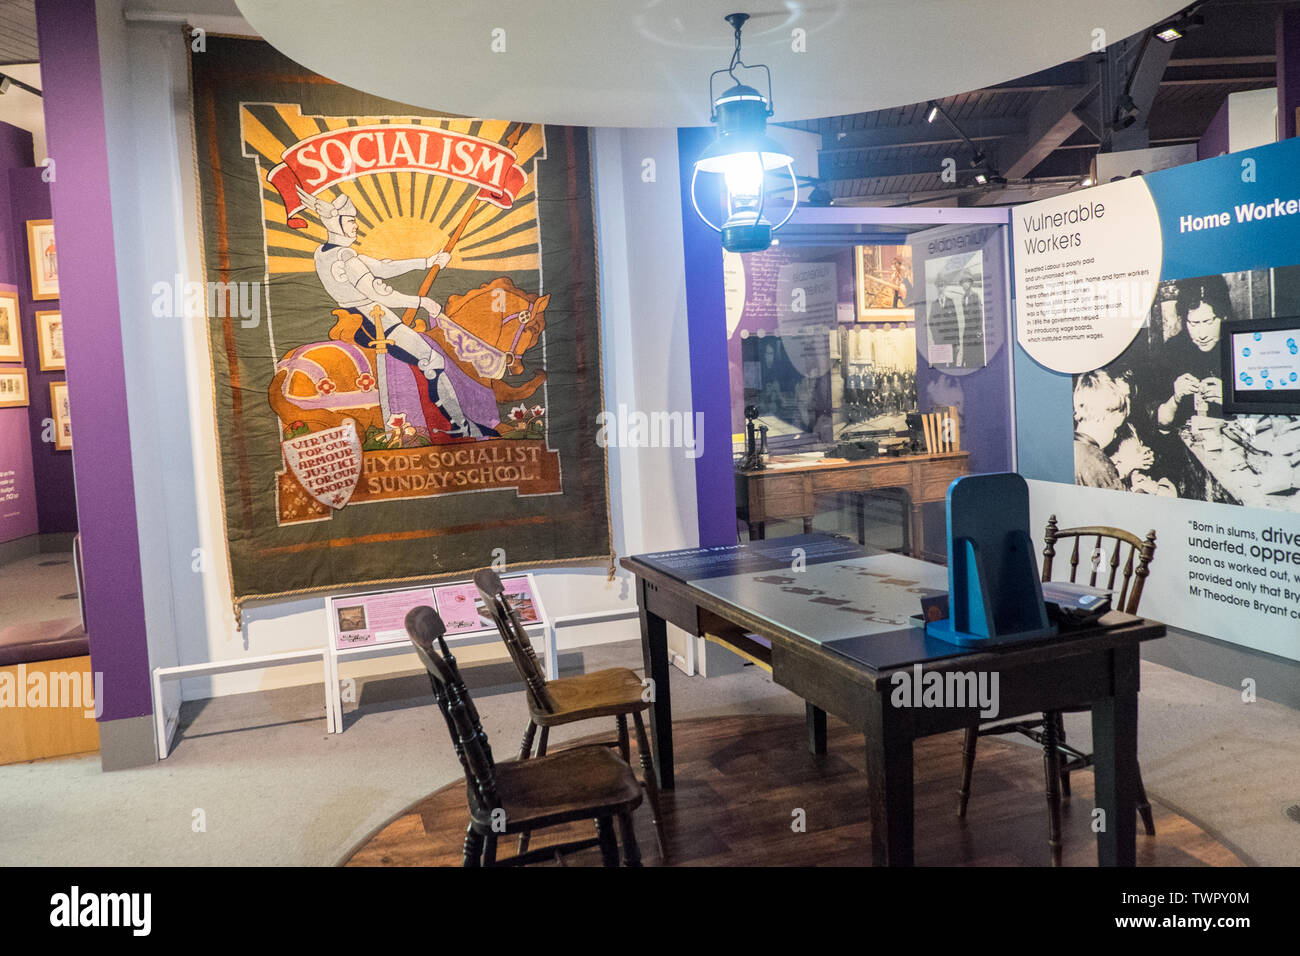 People's History Museum,Left Bank,devoted,to,equality,justice,Manchester,north,northern,north west,city,England,English,GB,UK,Britain,British,Europe, Stock Photo